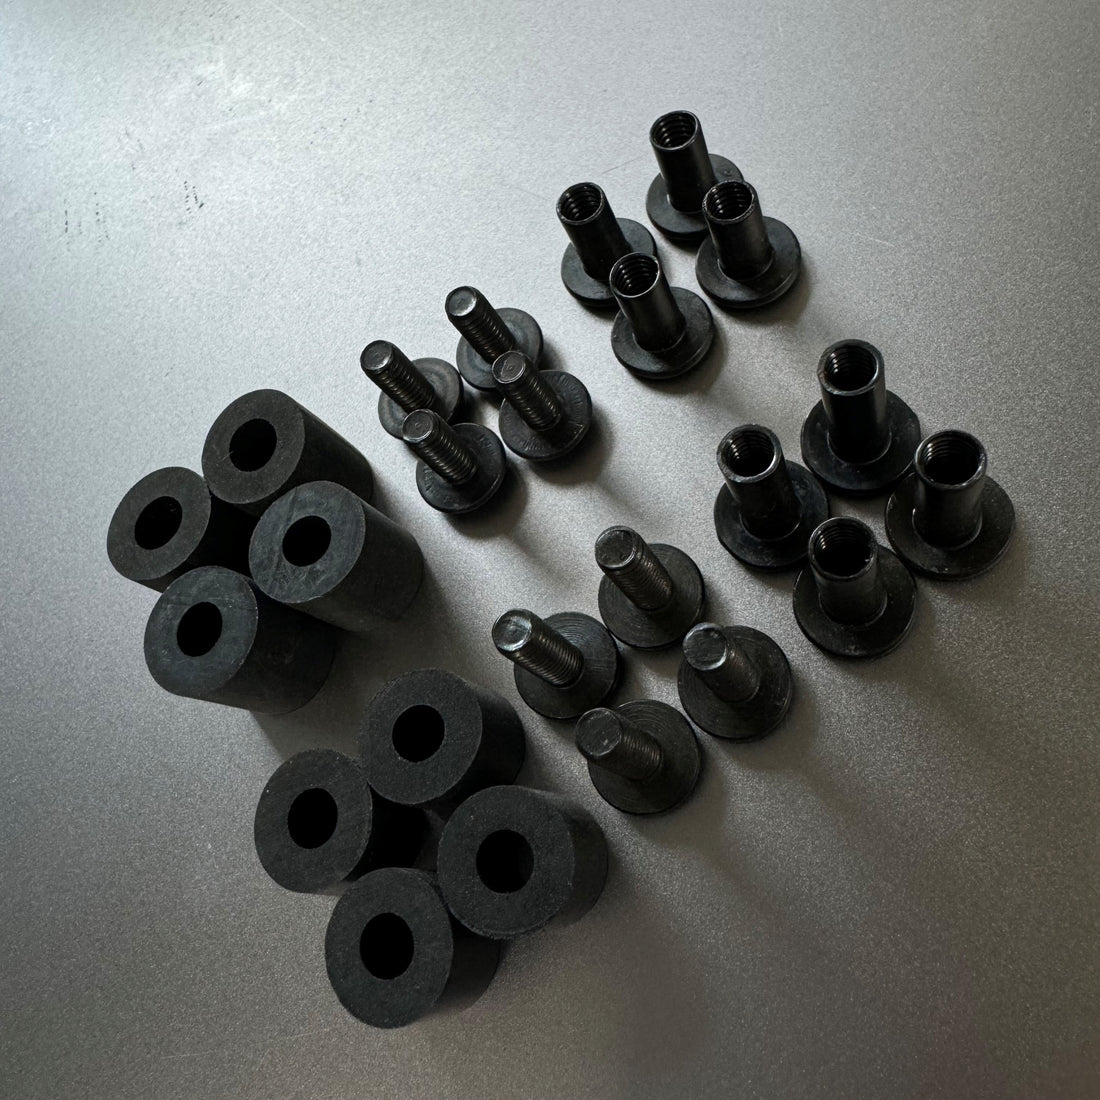 Screw replacement set for Safariland